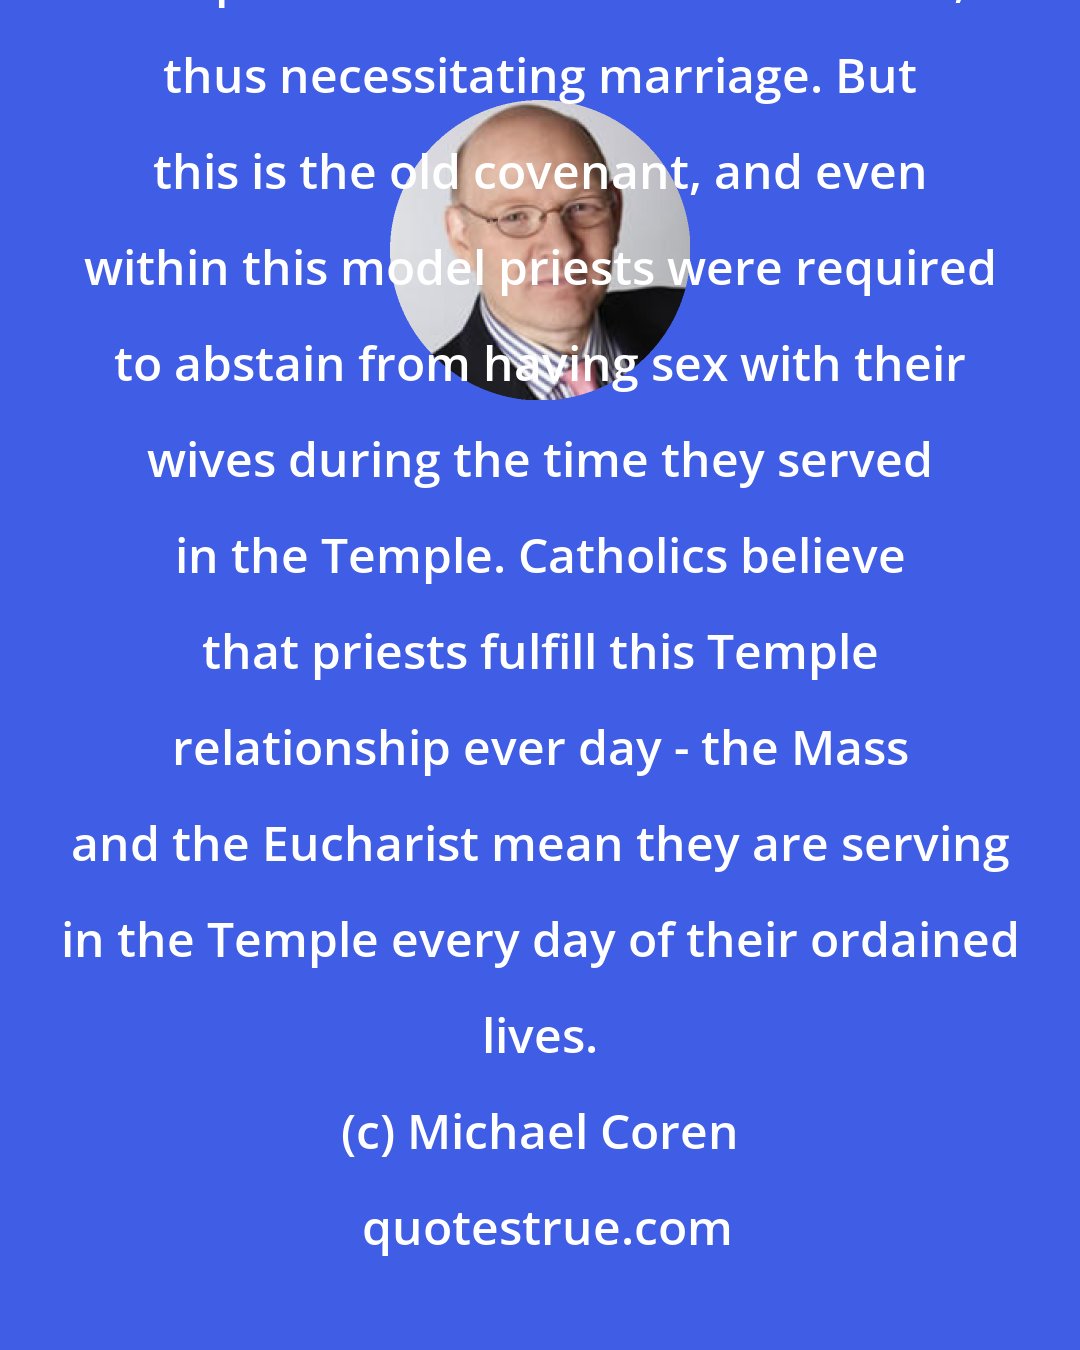 Michael Coren: In early Judaism, the priesthood was maintained within various families and passed down from father to son, thus necessitating marriage. But this is the old covenant, and even within this model priests were required to abstain from having sex with their wives during the time they served in the Temple. Catholics believe that priests fulfill this Temple relationship ever day - the Mass and the Eucharist mean they are serving in the Temple every day of their ordained lives.